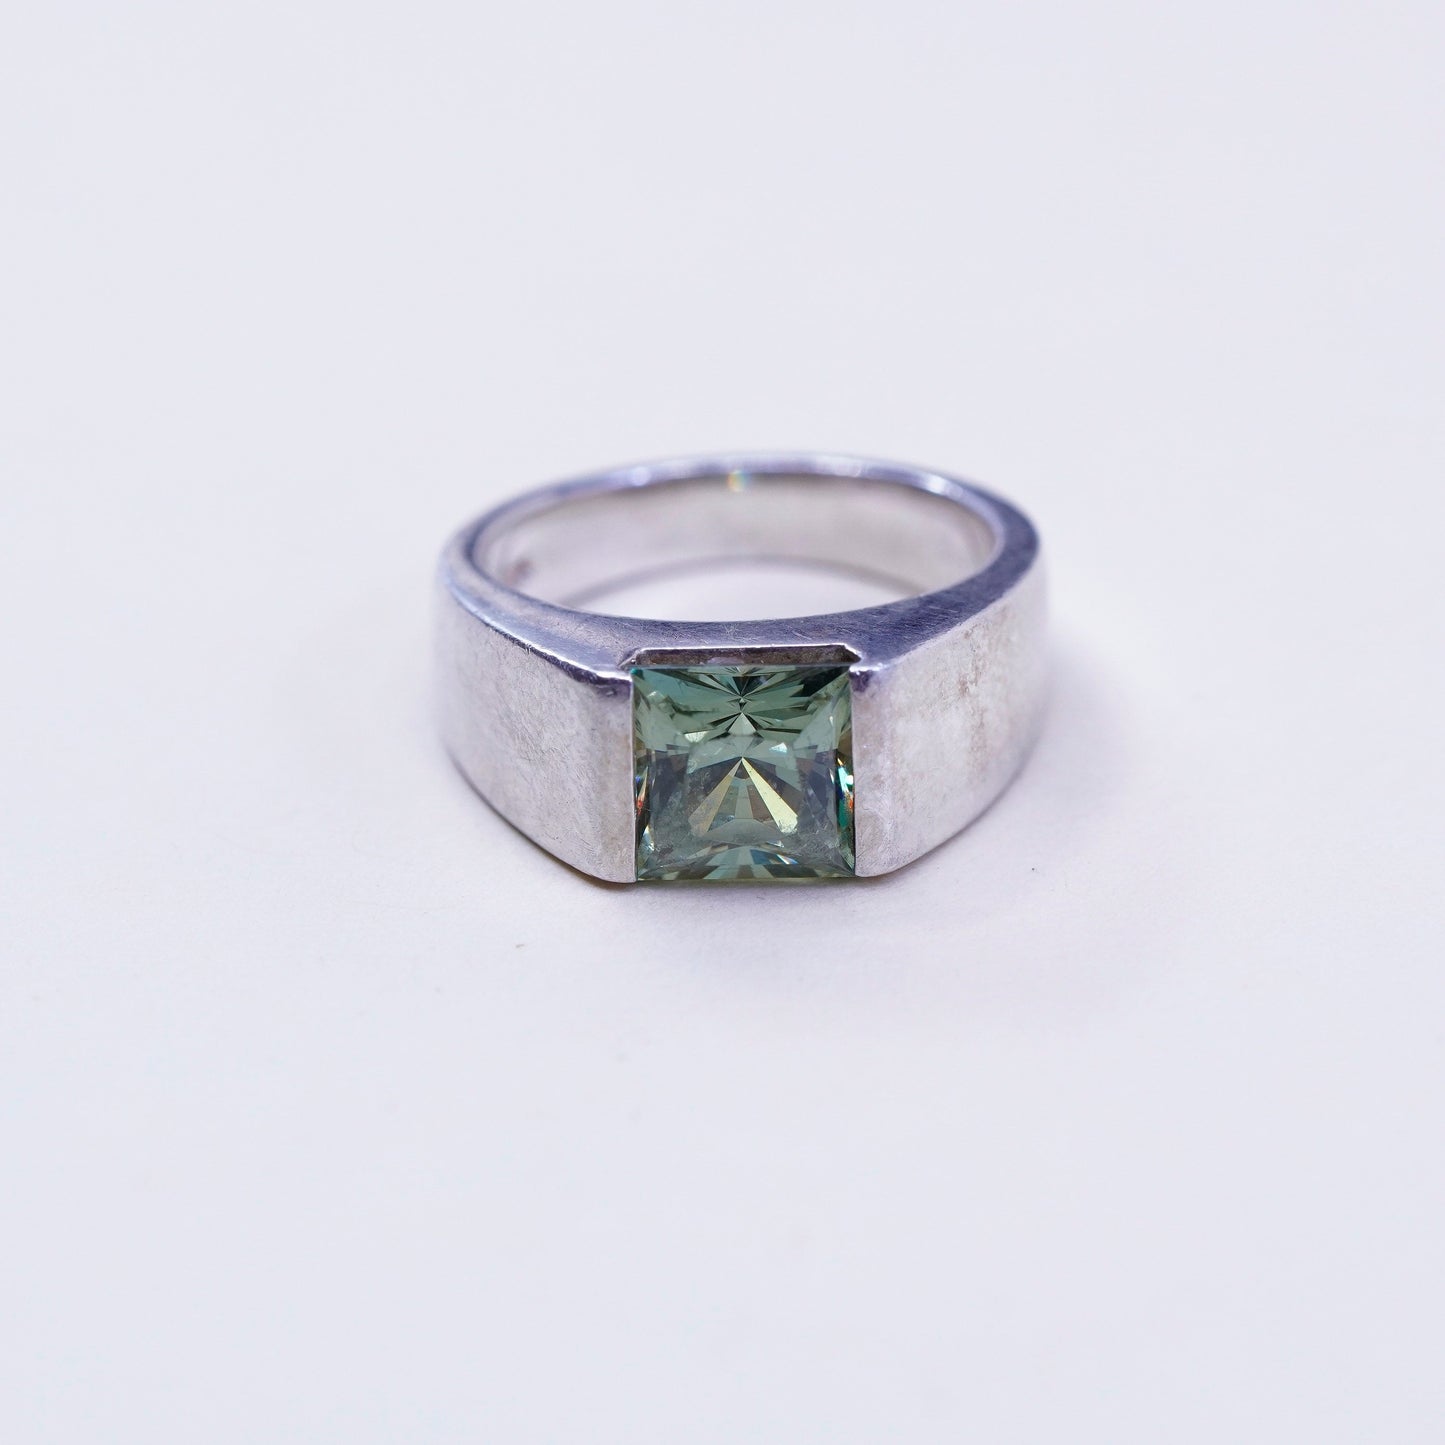 Size 5, JJJ Sterling silver handmade ring, modern 925 band with square peridot